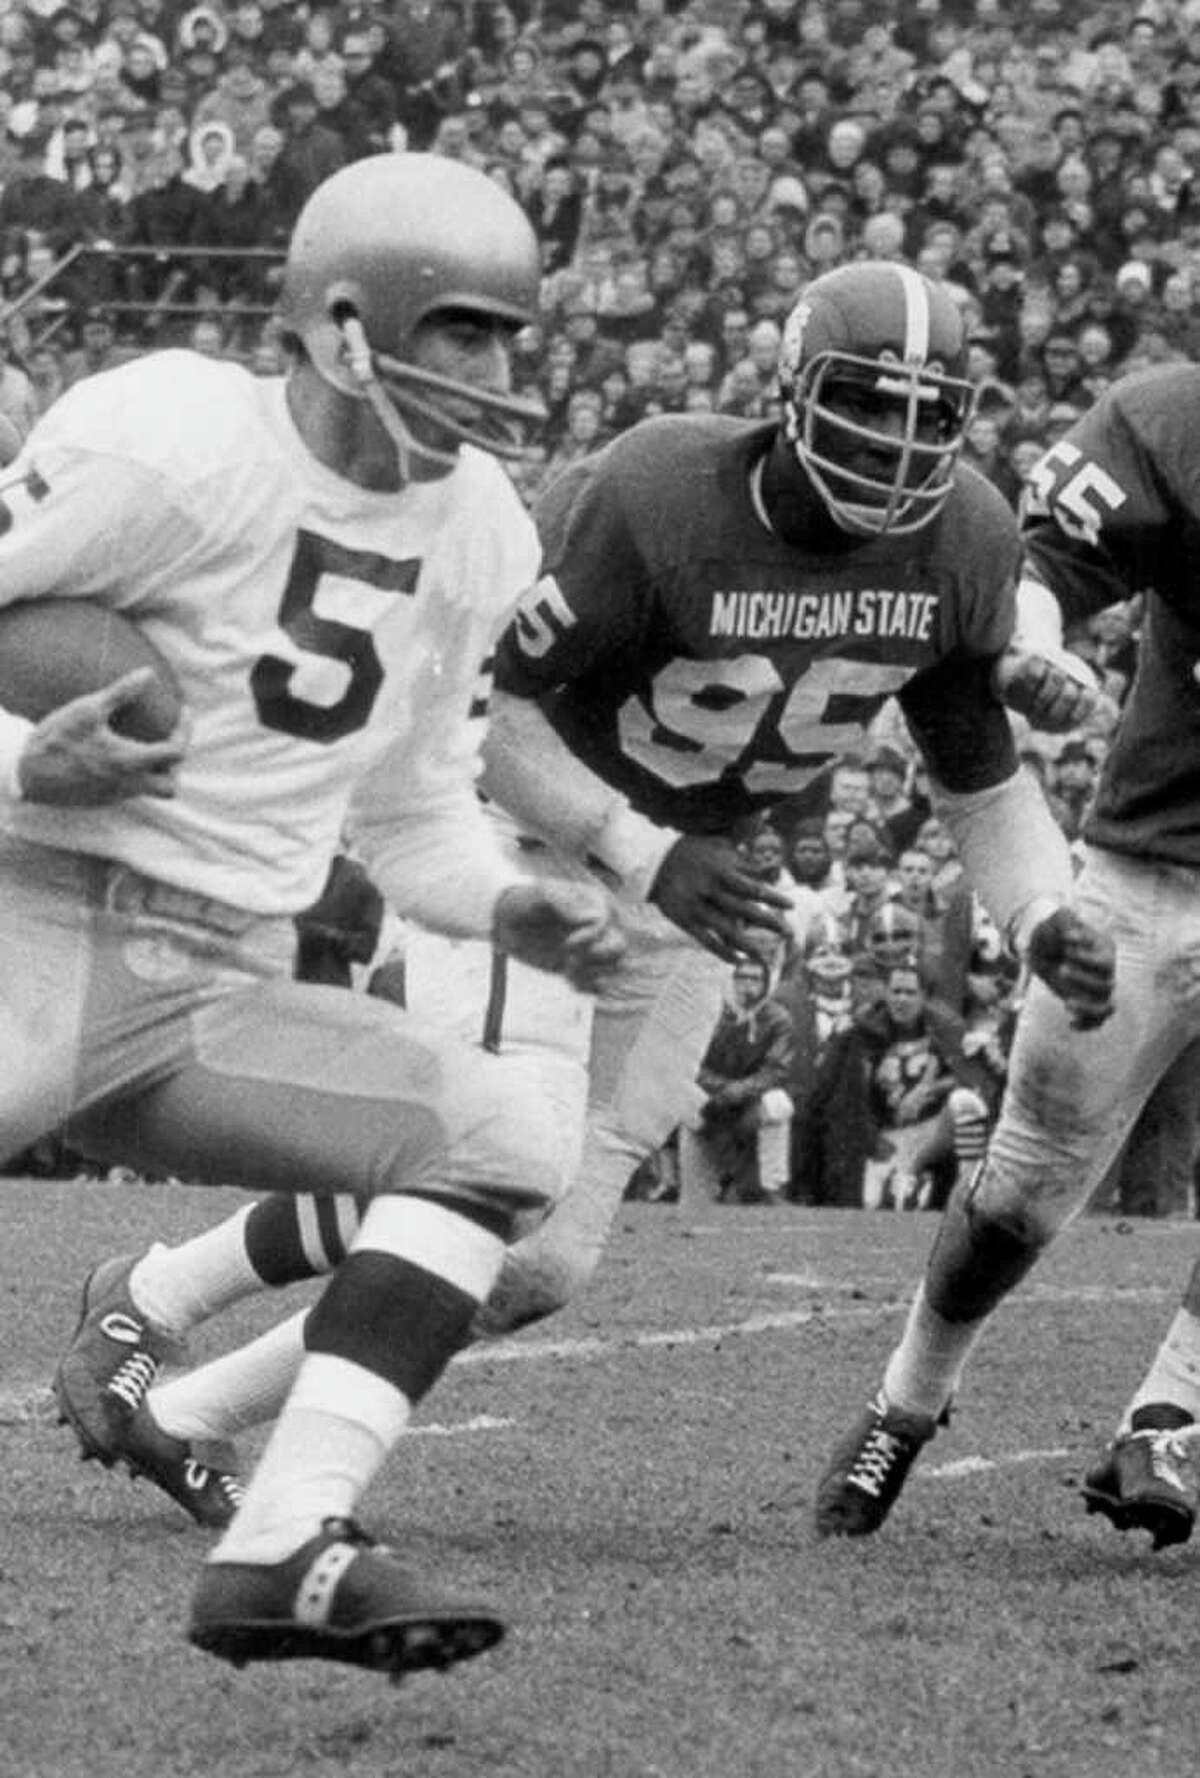 In a 1966 photo provided by Michigan State University, Michigan State's Bubba Smith, rear, chases down Notre Dame quarterback Terry Hanratty during a college football game in East Lansing, Mich. Smith, an NFL defensive star who found a successful second career as an actor, died Wednesday, Aug. 3, 2011, in Los Angeles at age 66. Los Angeles County coroner's spokesman Ed Winter said Smith was found dead at his Baldwin Hills home. Winter said he didn't know the circumstances or cause of death. (AP Photo/Michigan State University)